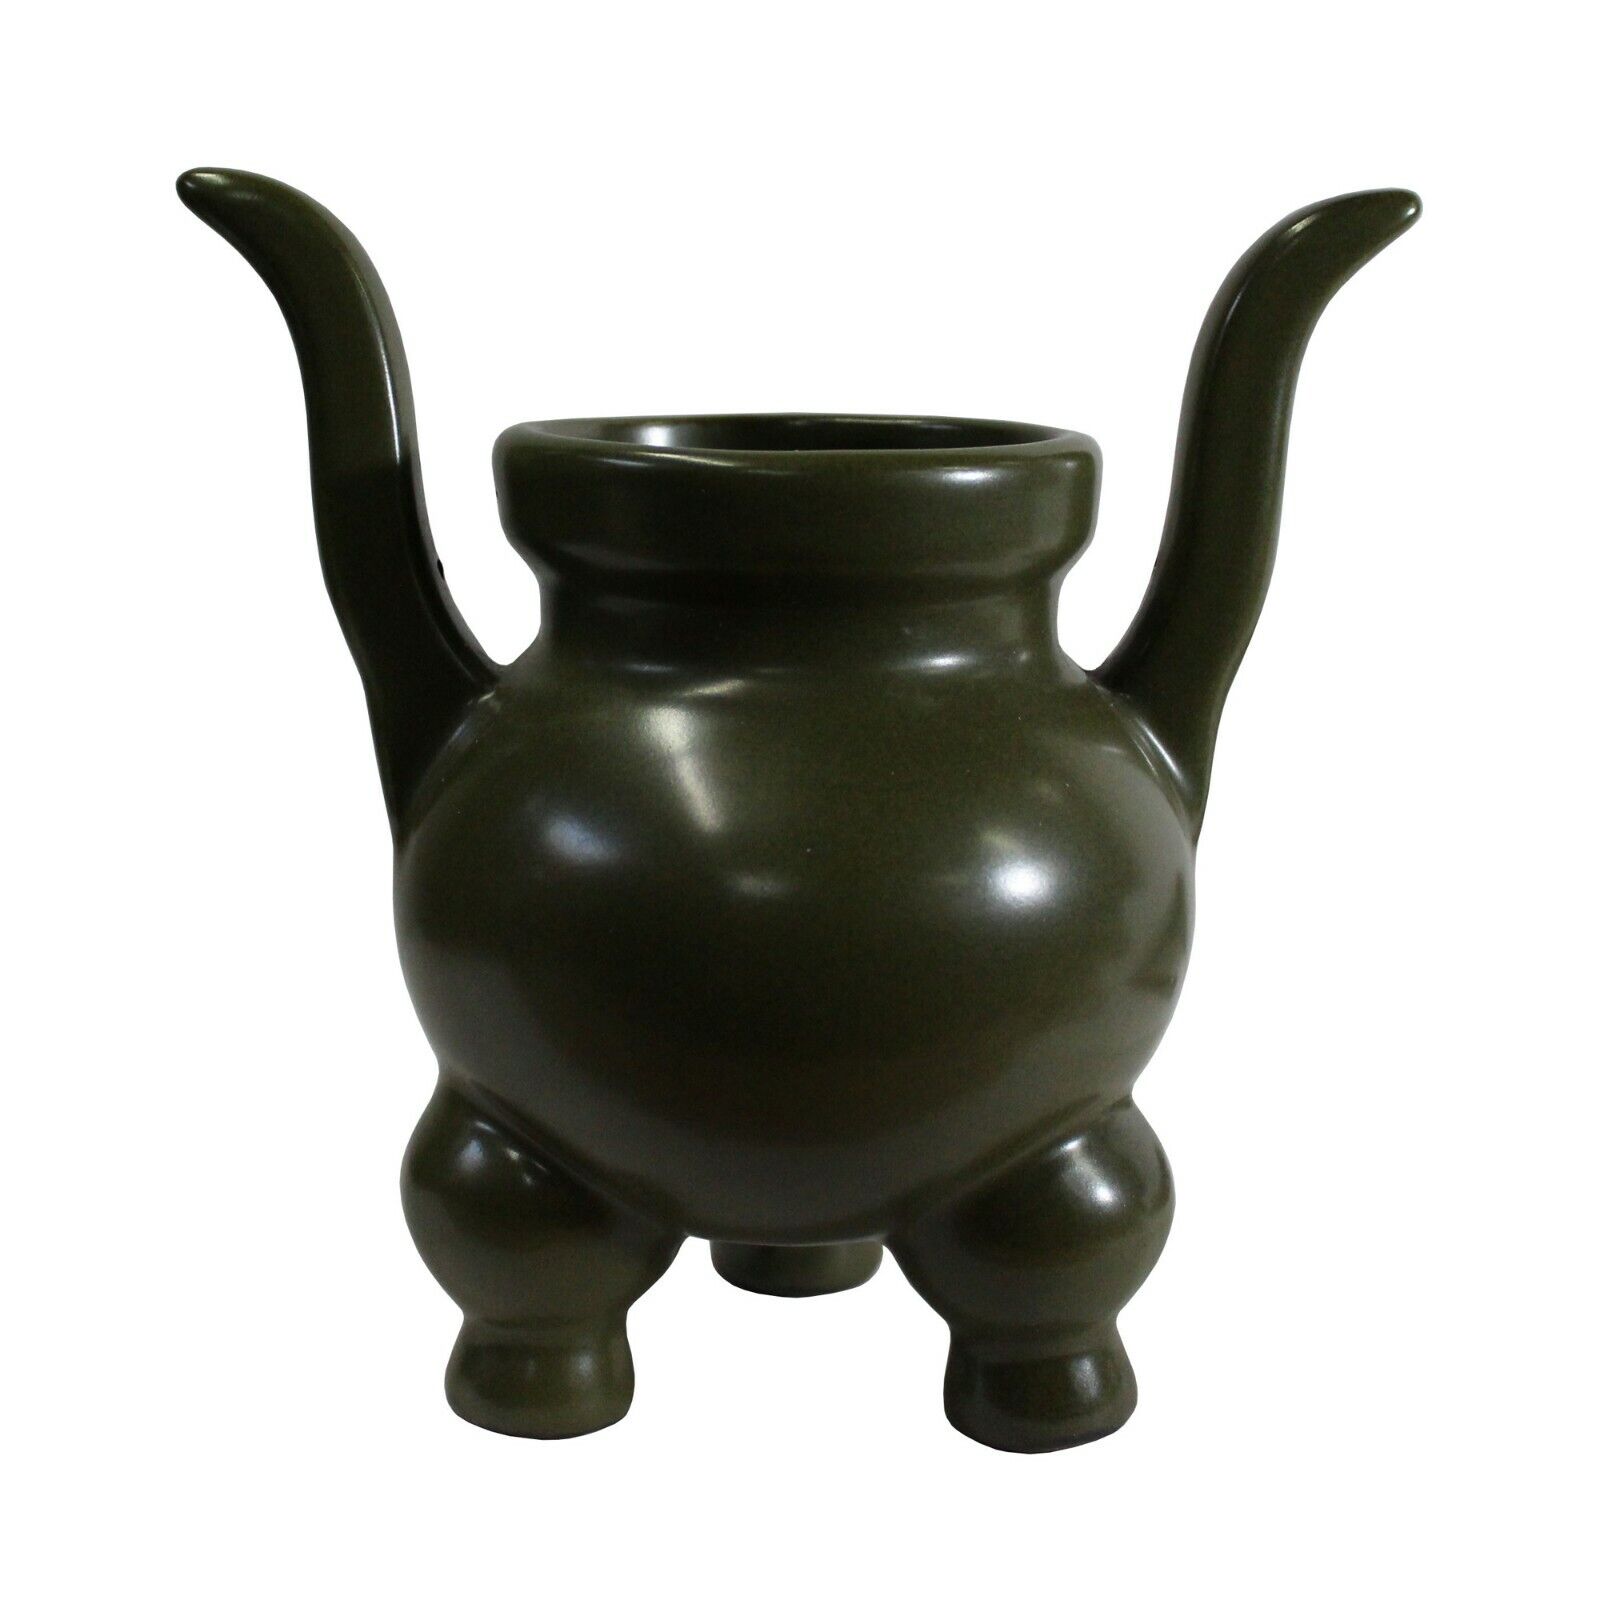 Chinese Handmade Dark Olive Army Green Ceramic Accent Ding Holder ws326